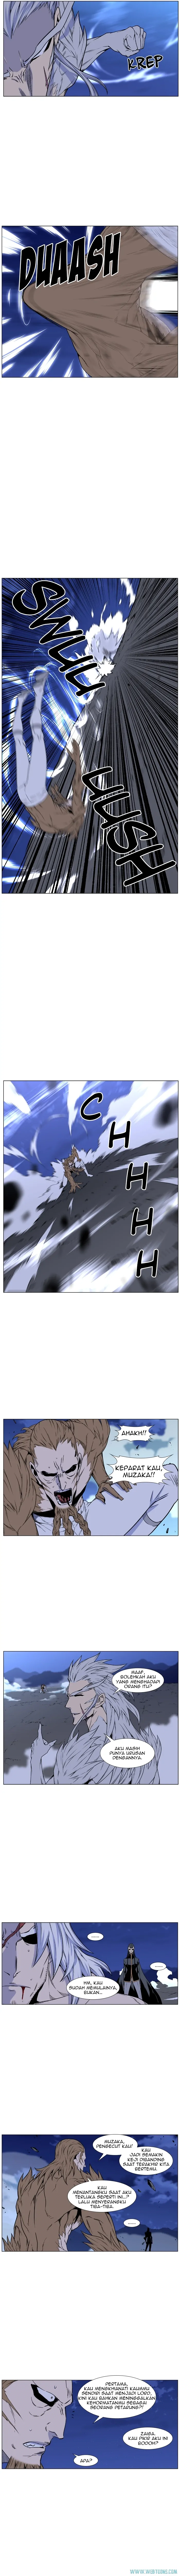 Noblesse Chapter 442 - 75